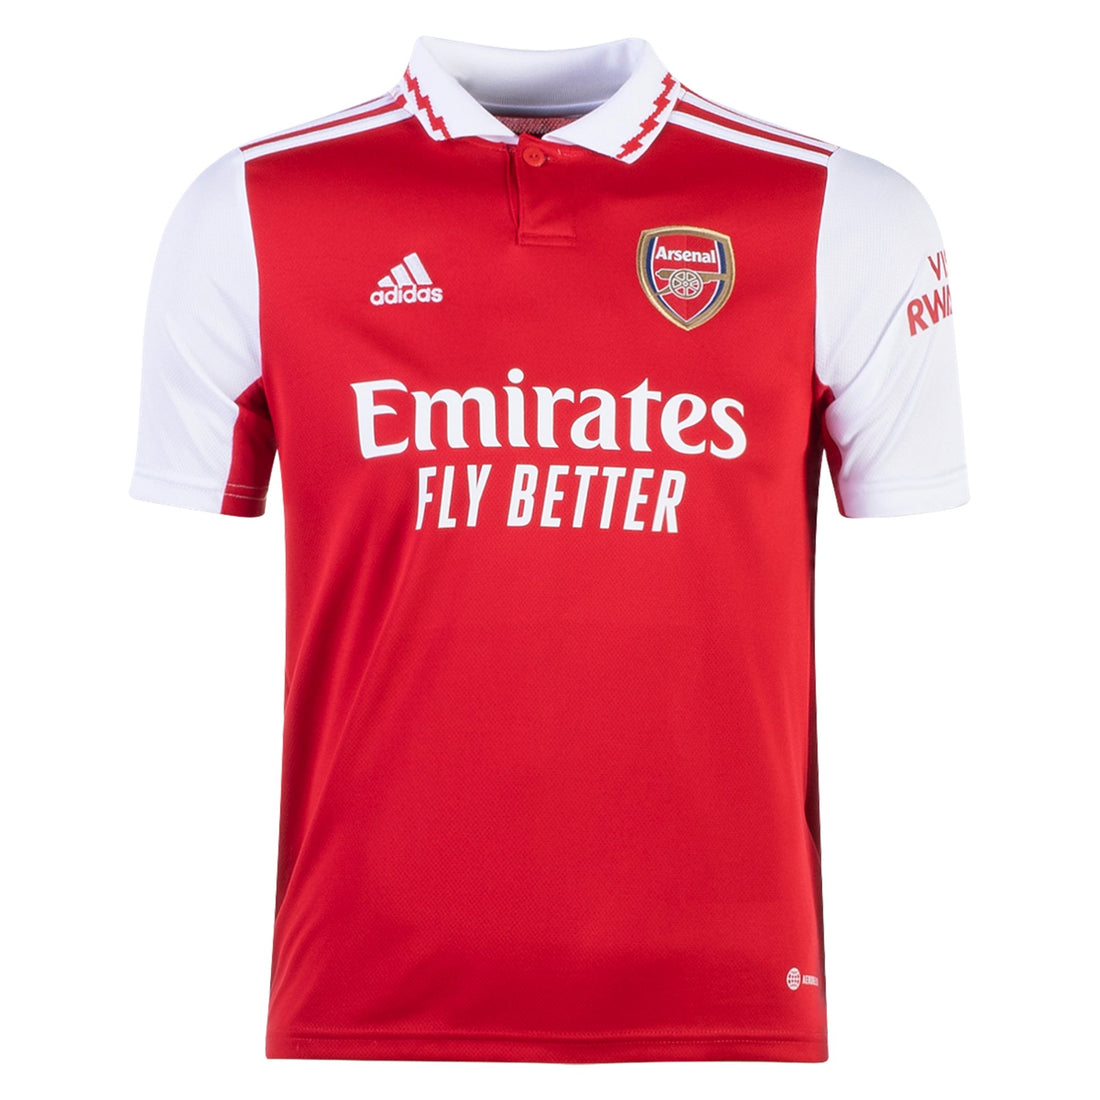 Arsenal 2022/2023 Home Jersey